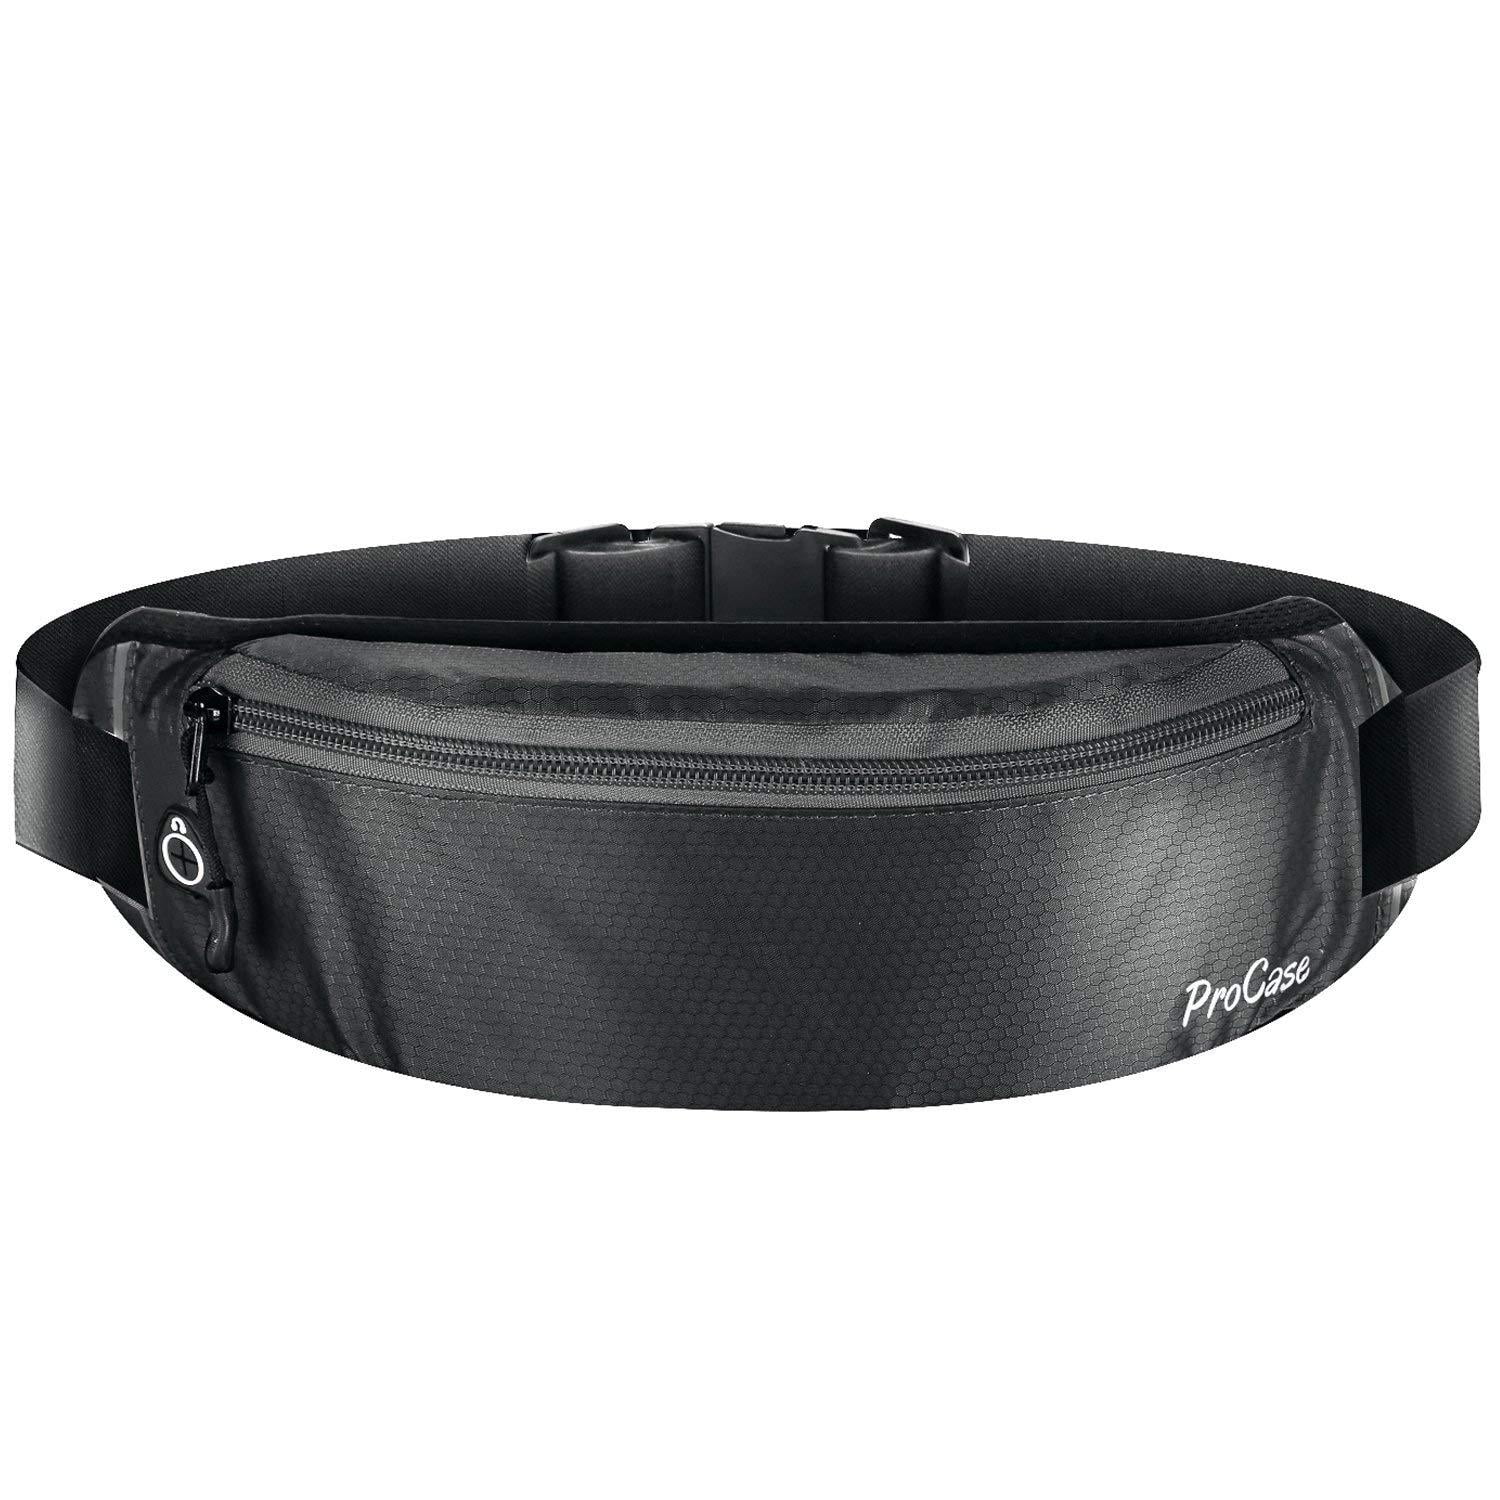 Running Jogging Belt Cycling Fanny Pack Waist Bag Pouch For Iphone Android Black 